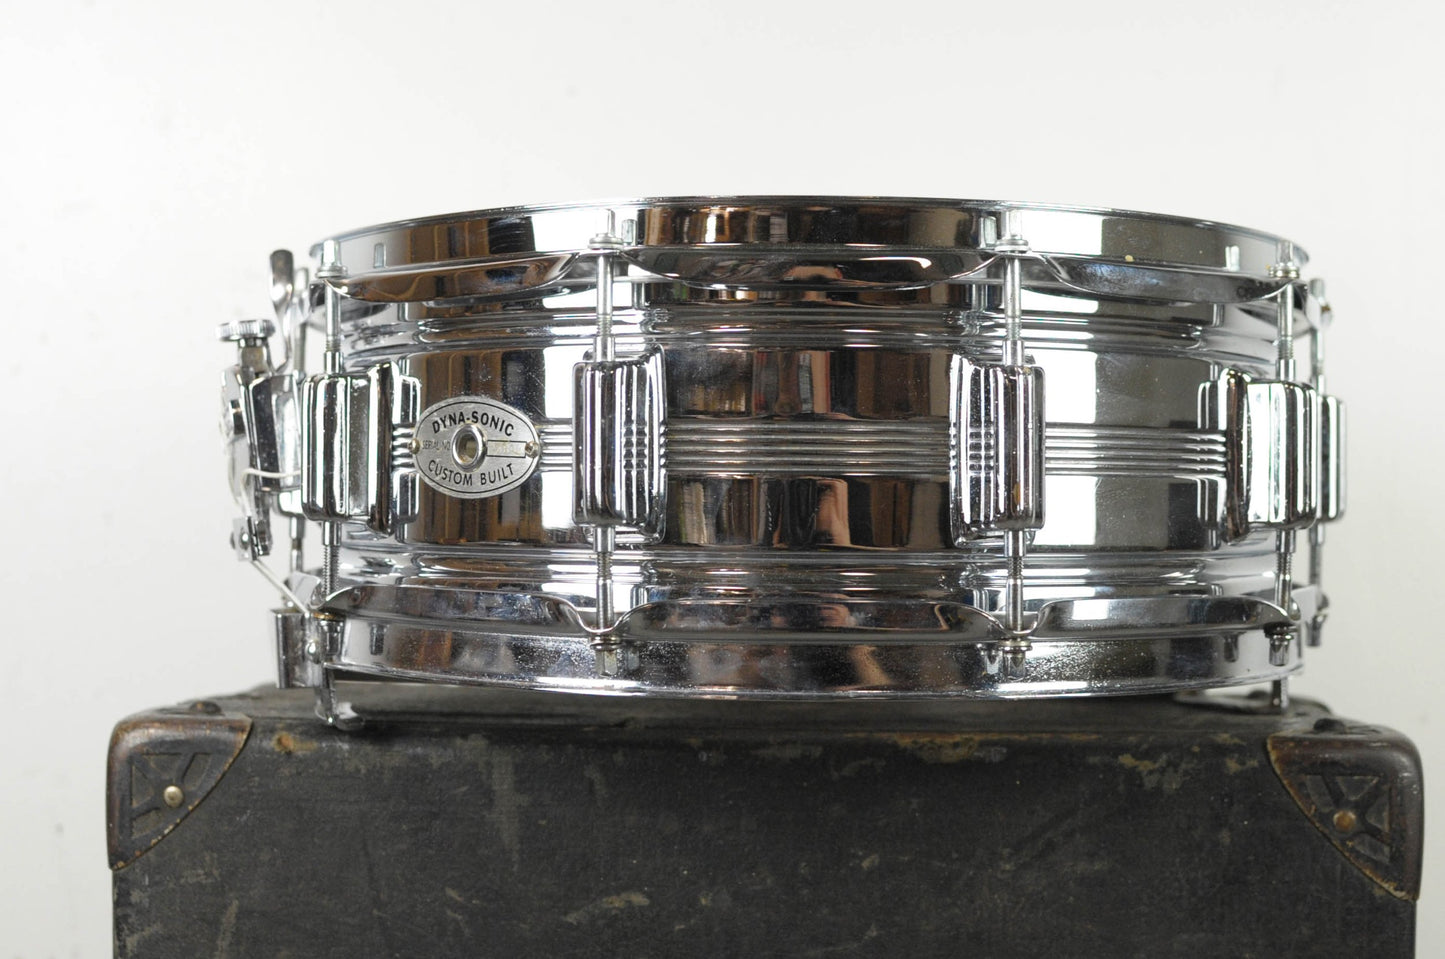 1970s Rogers 5x14 Dynasonic Snare Drum